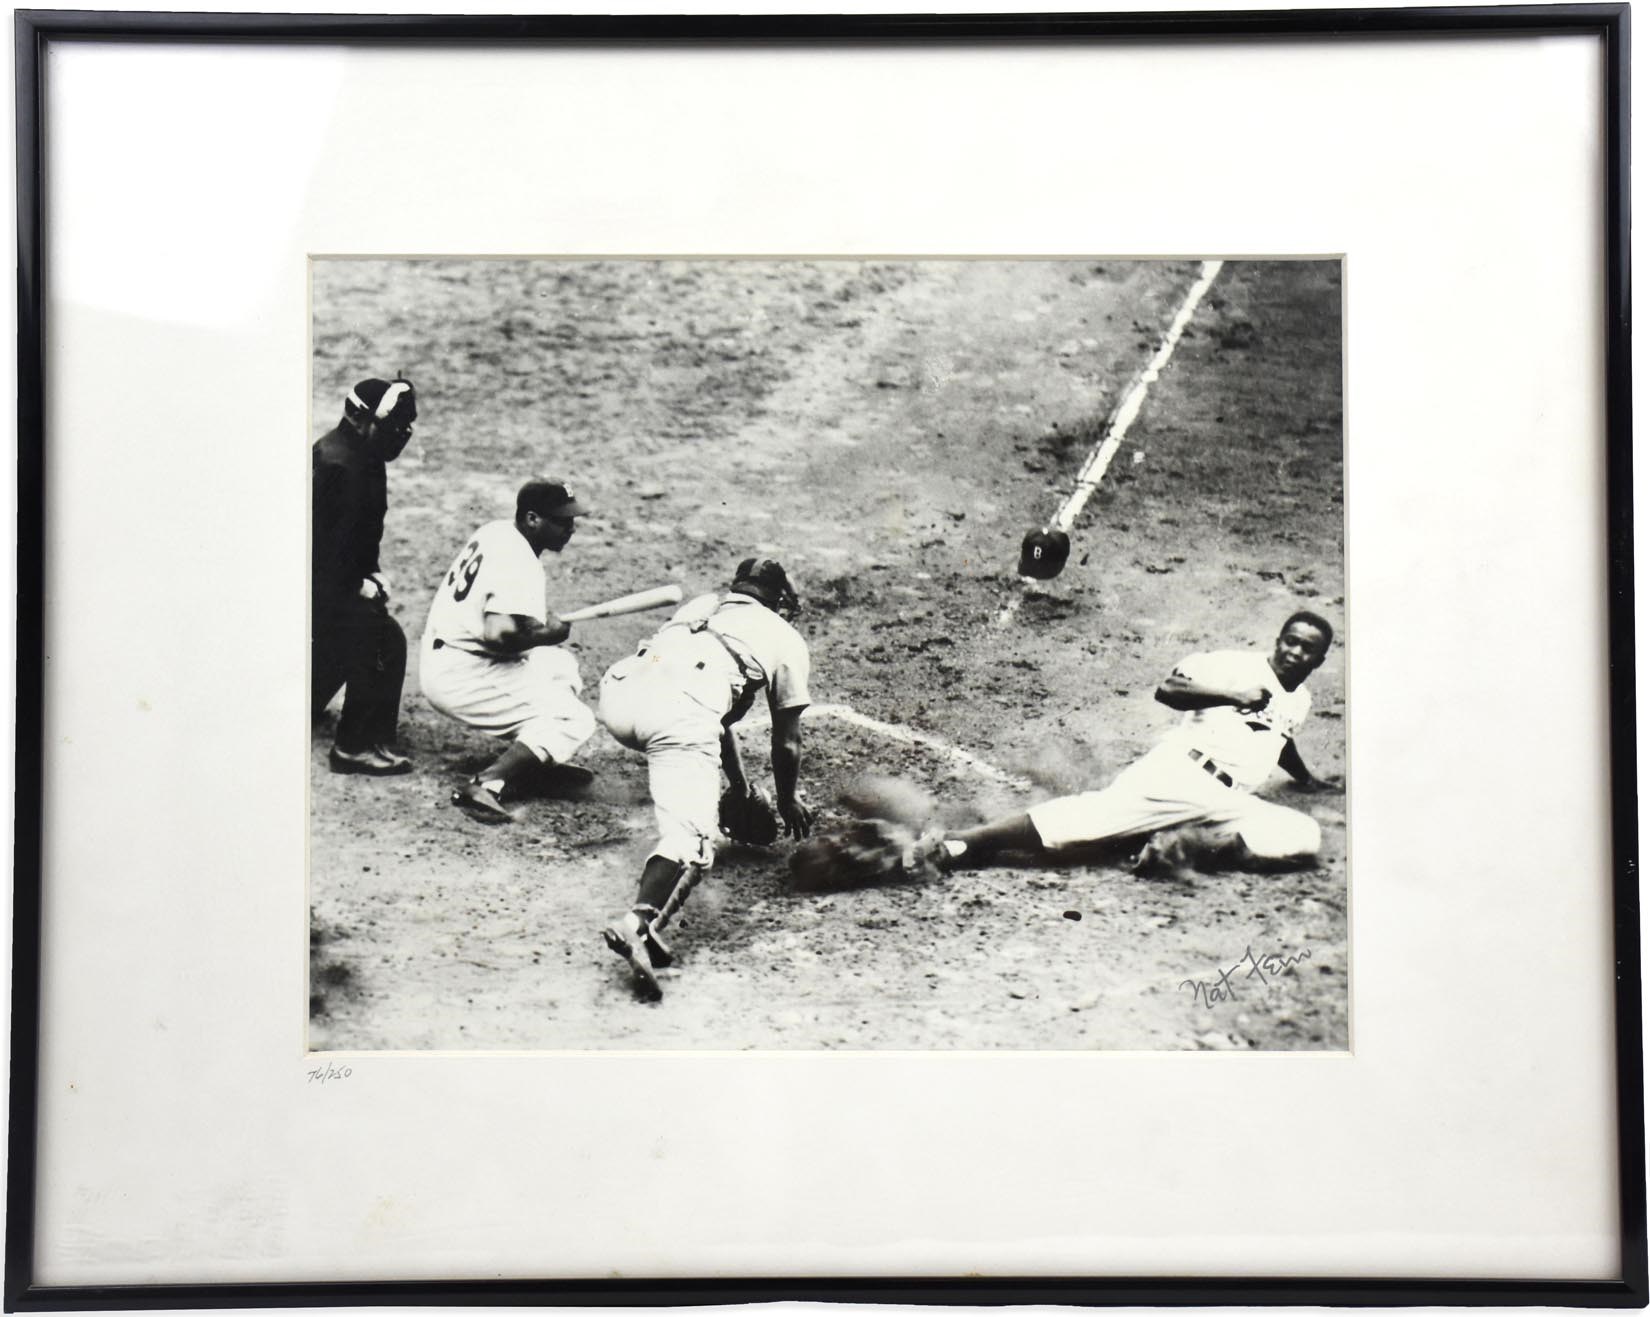 - Jackie Robinson "Stealing Home" Photograph Signed & by Pulitzer Prize Winner Nat Fein